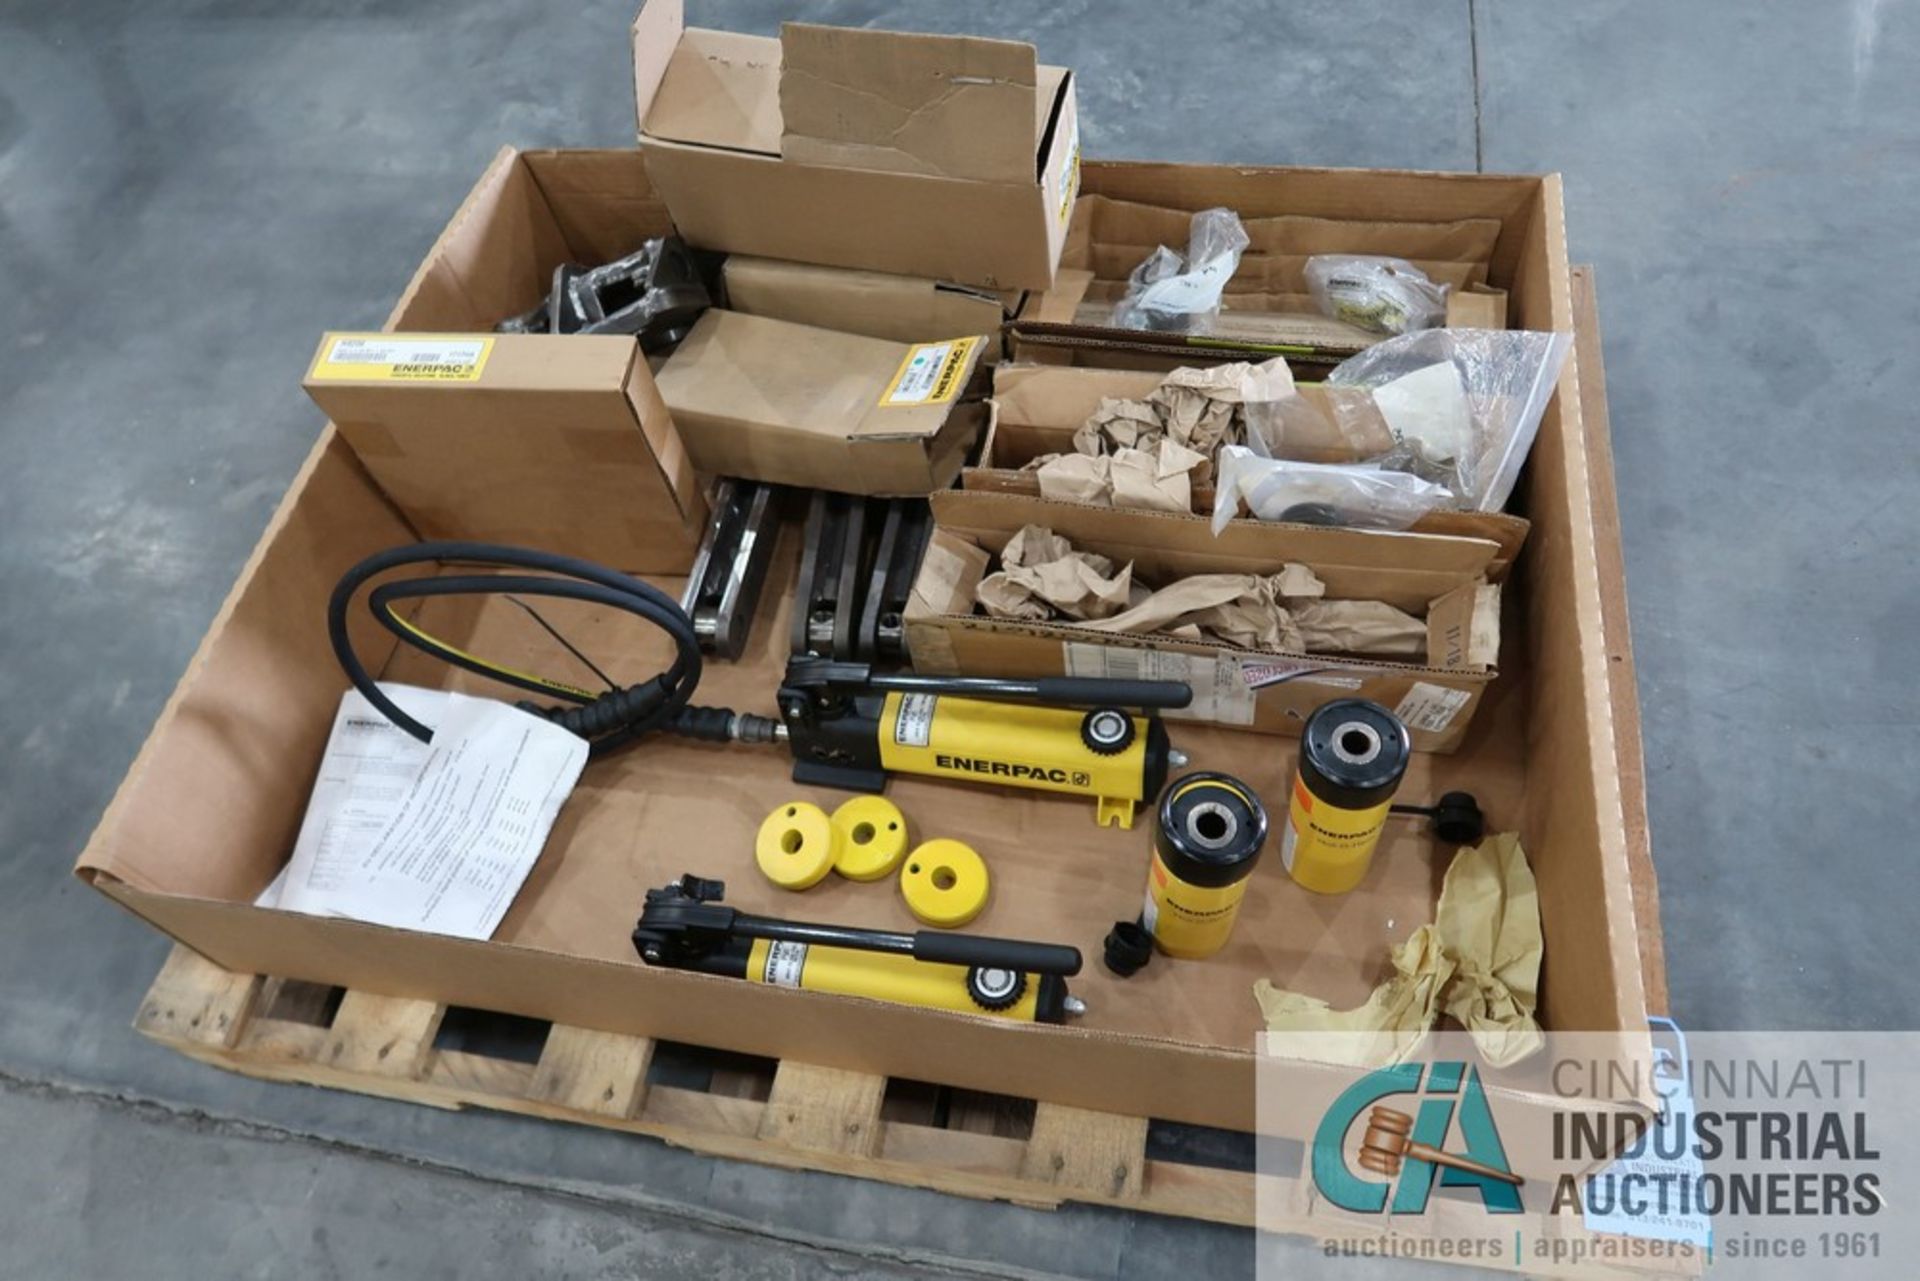 10,000 PSI MAX ENERPAC HAND HYDRAULIC PUMPS WITH (2) 12 TON CAP ENERPAC HOLL-O-RAM CYLINDERS